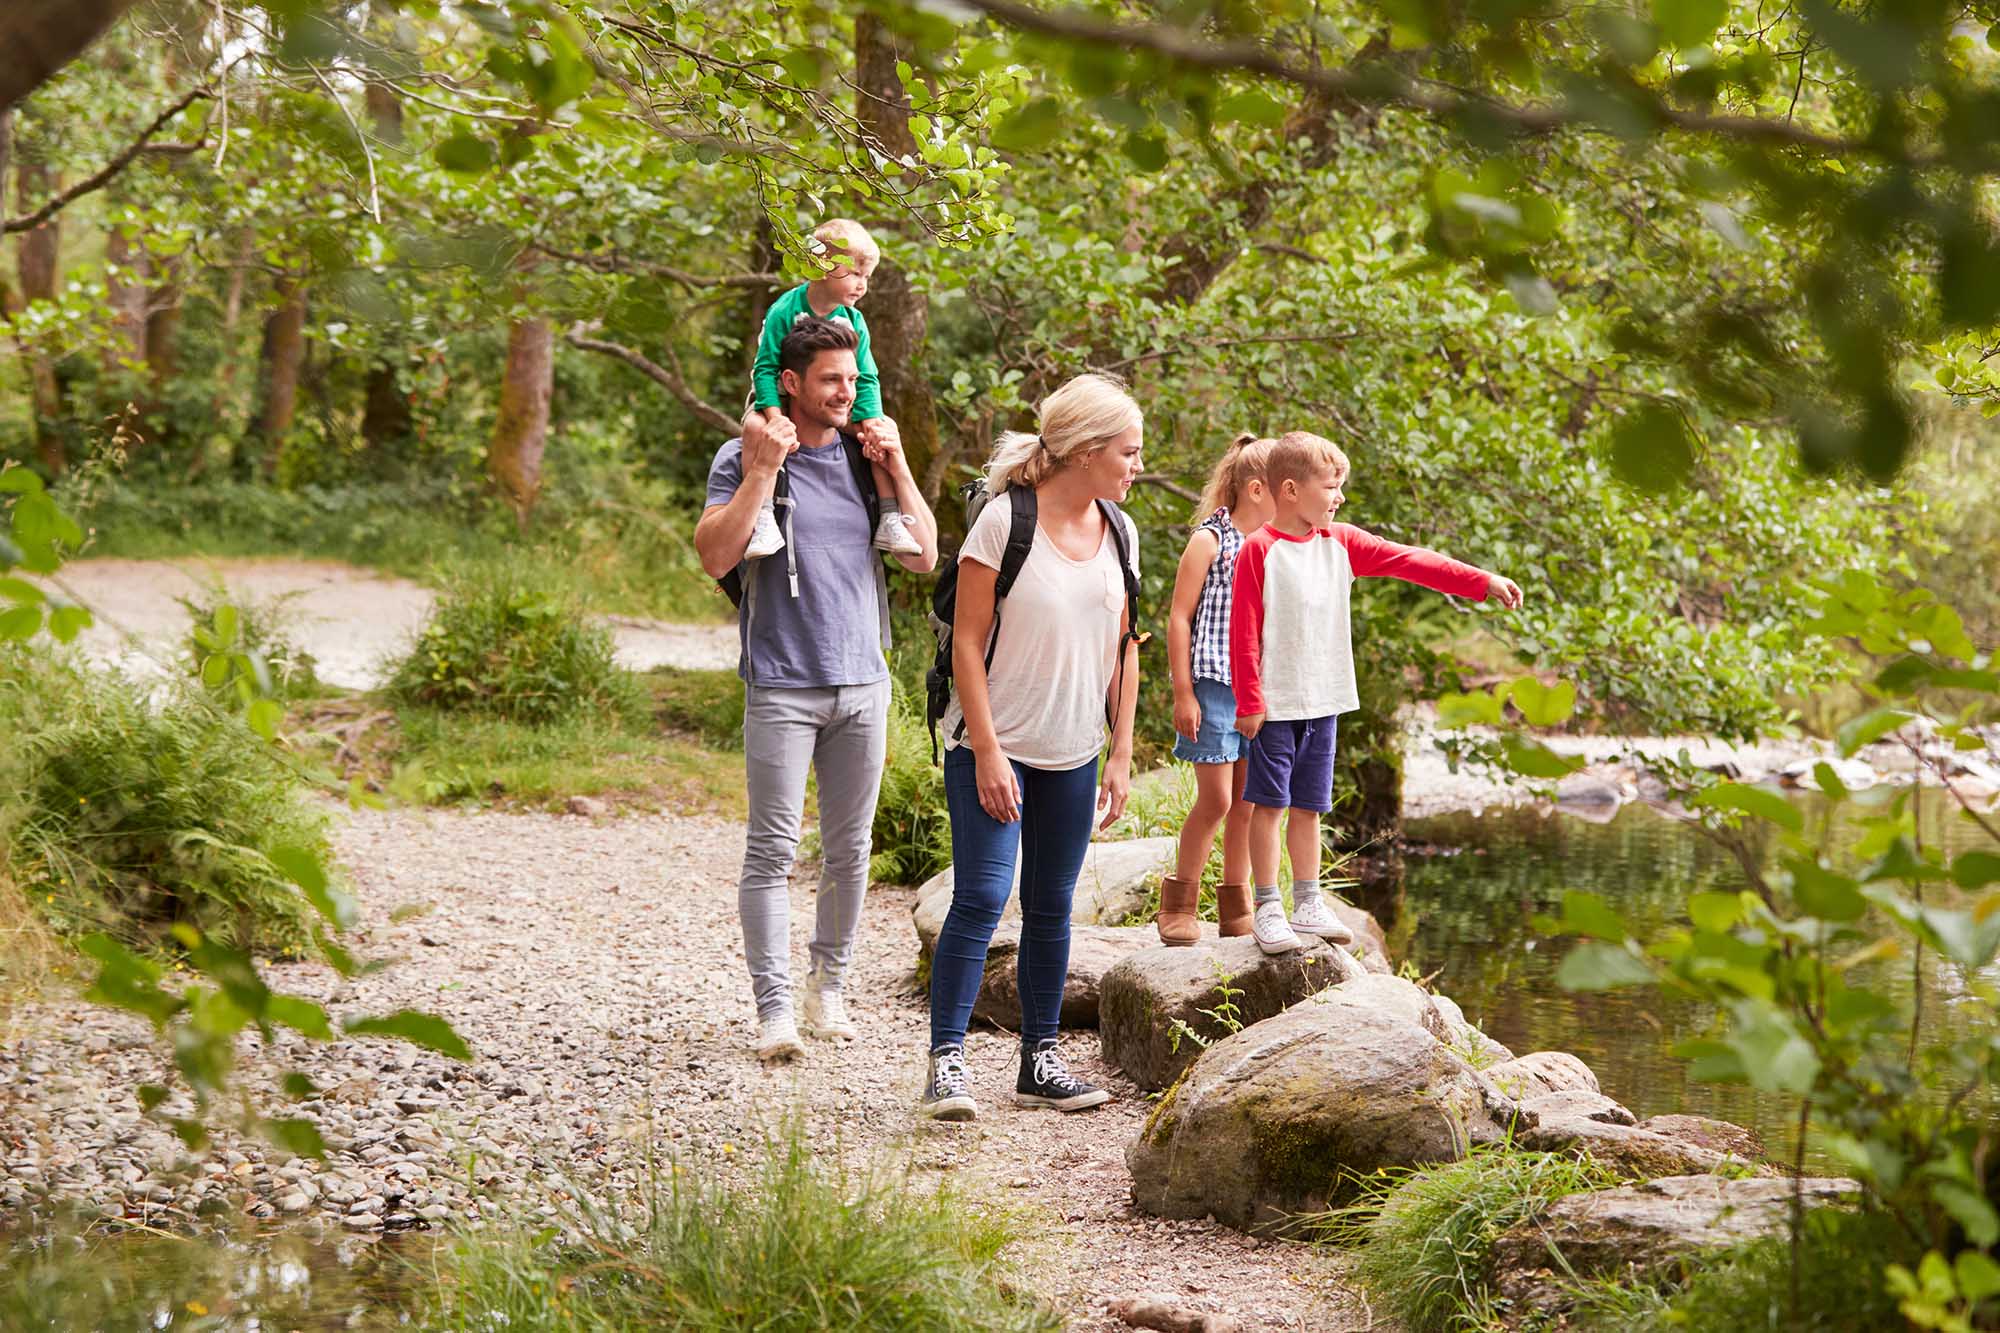 Campsite Resorts for Family Holidays Abroad